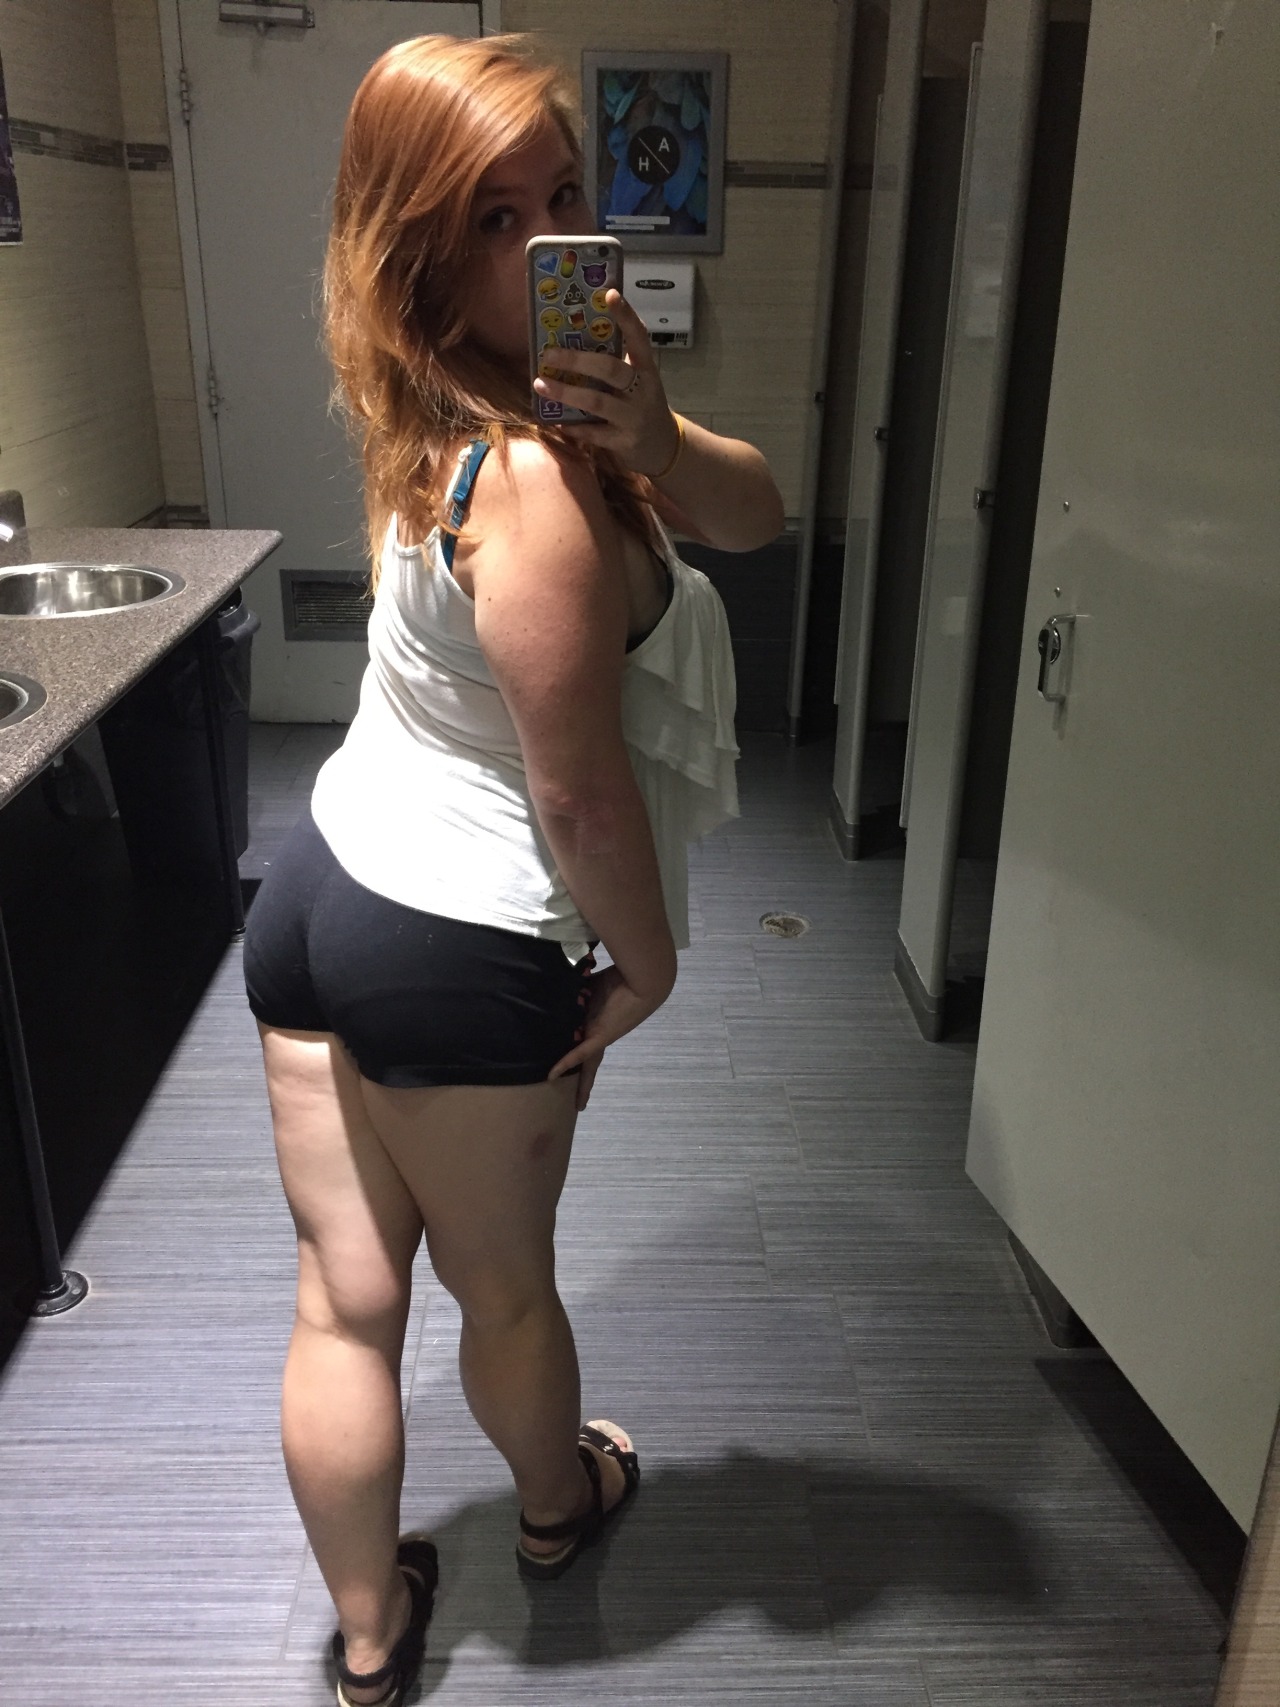 serendipitousfoxx:  Being naughty at bar bathrooms hehe 😉👊🏻🍻